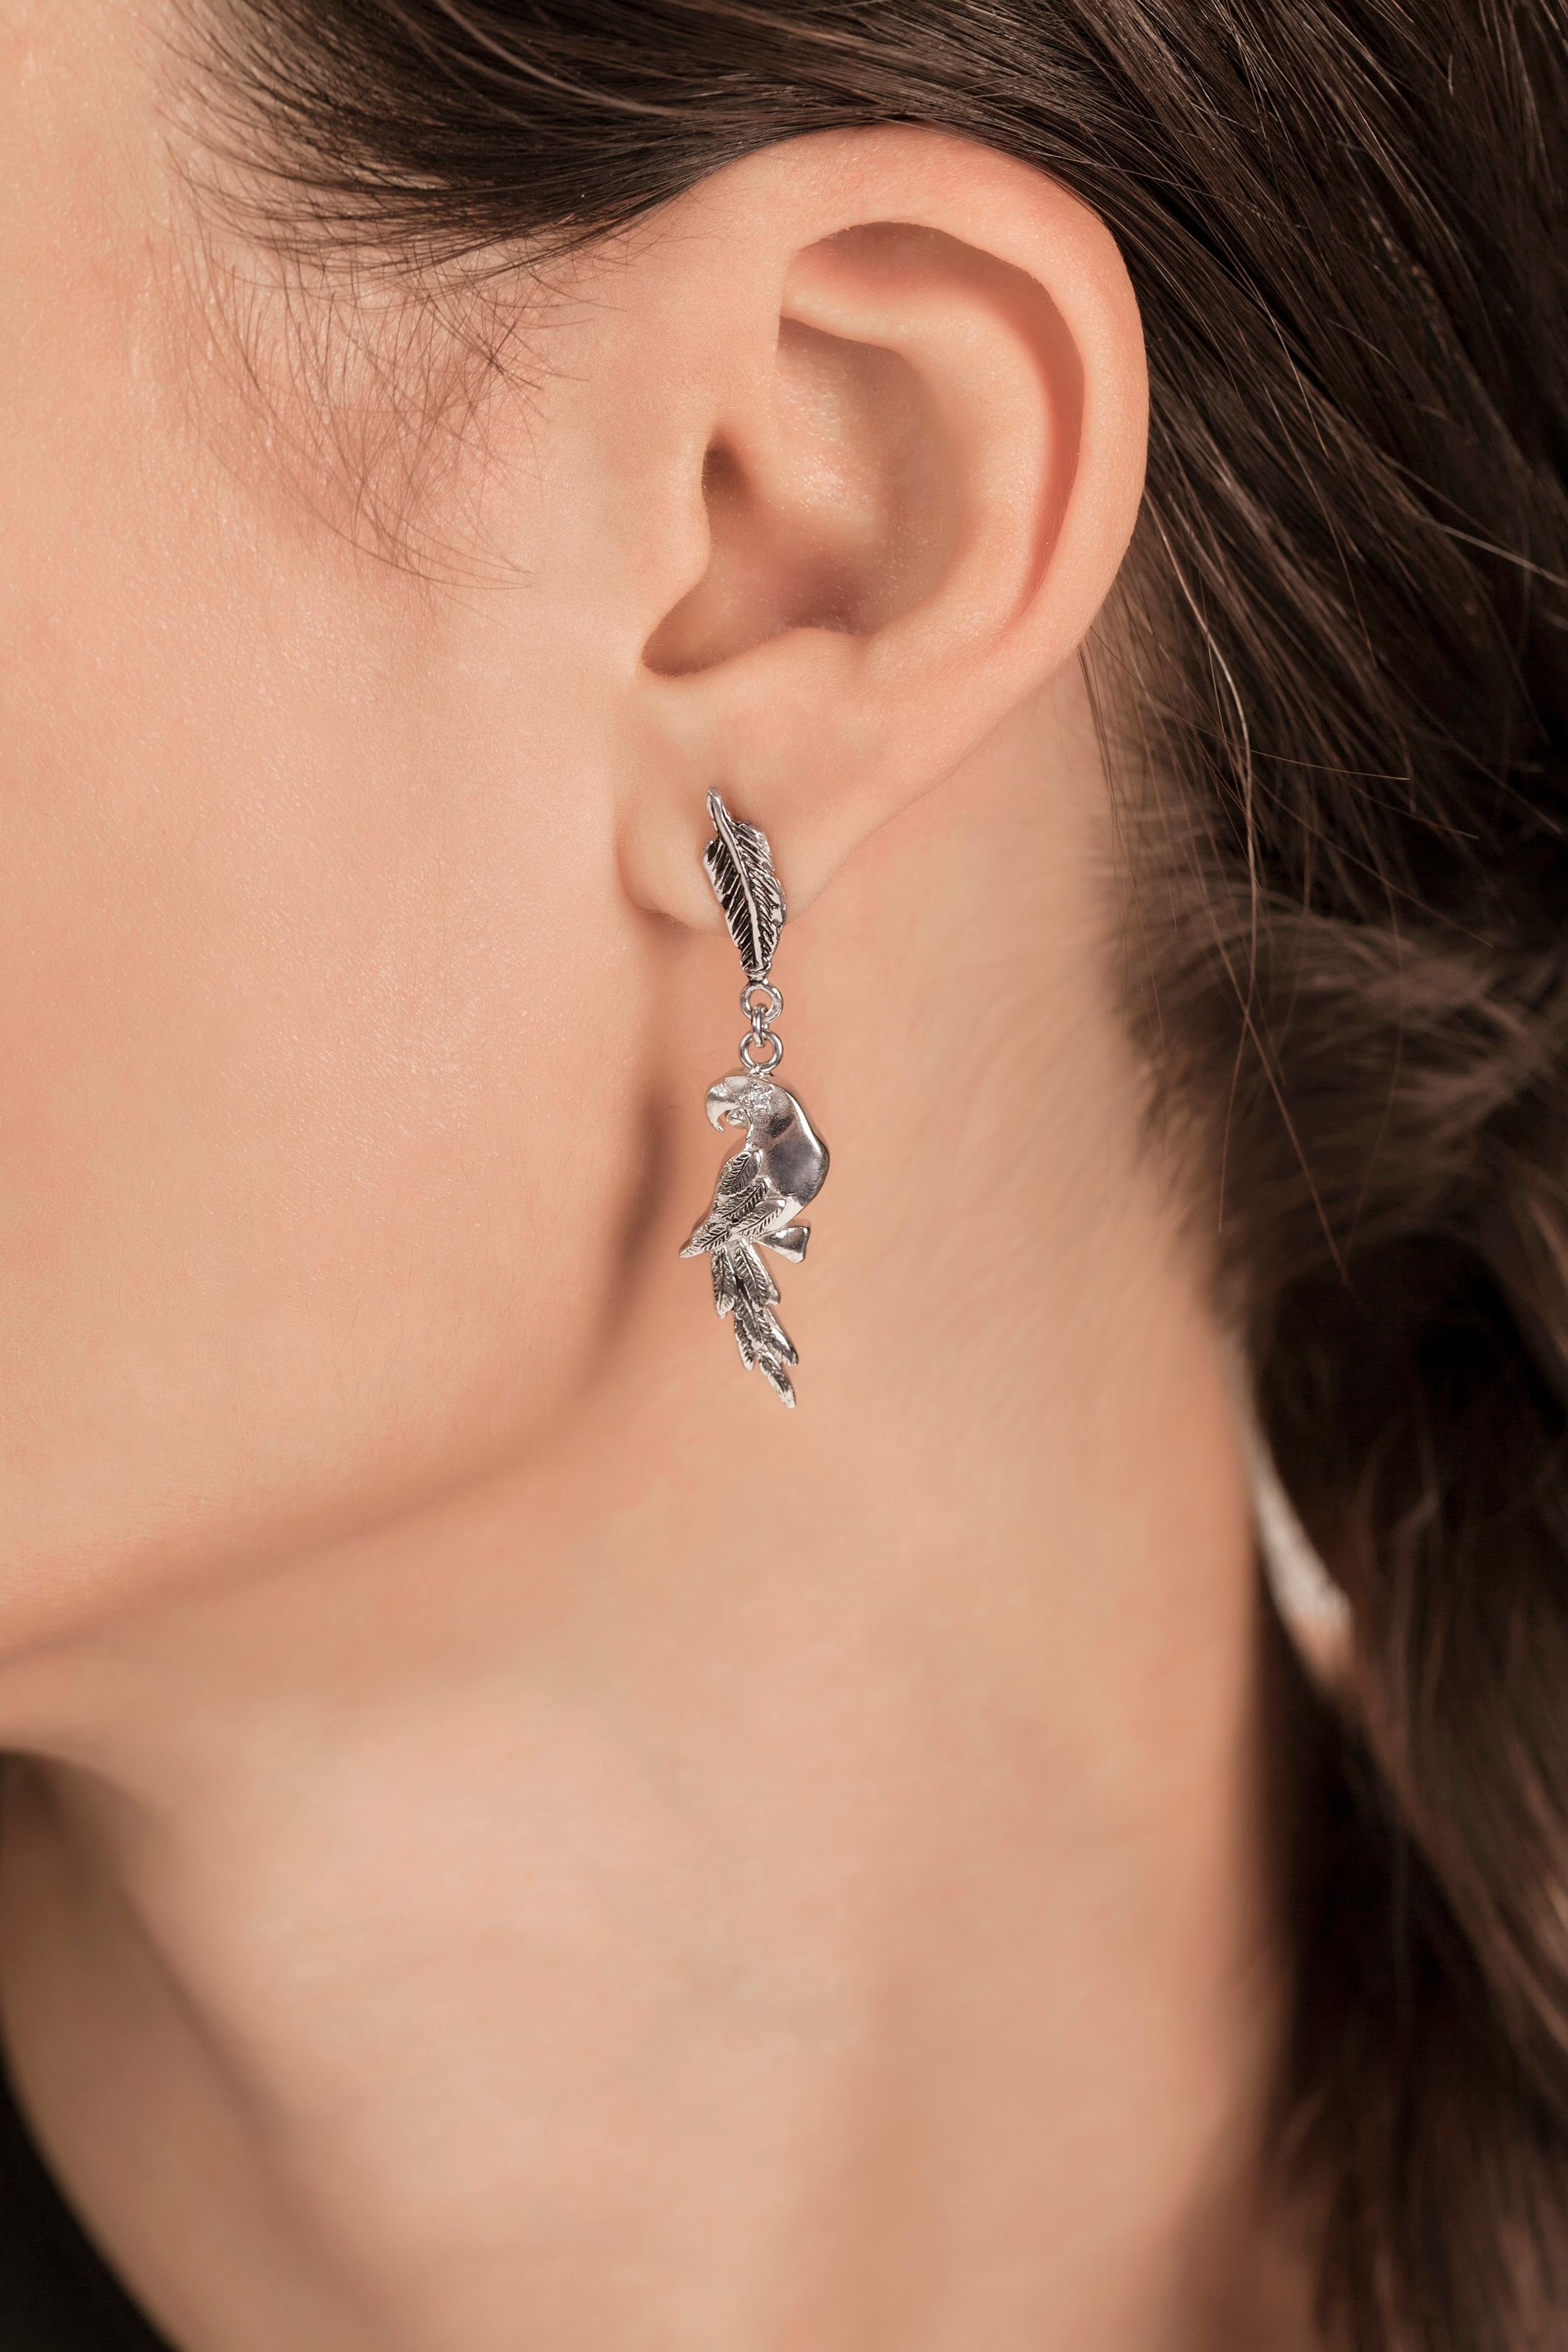 The Feathers and Parrots earrings are part of the Brazilian Soul collection, which aims to carry the positive message of Brazilian vitality through constant reminders of nature, from which Thais Bernardes draws inspiration for her unique